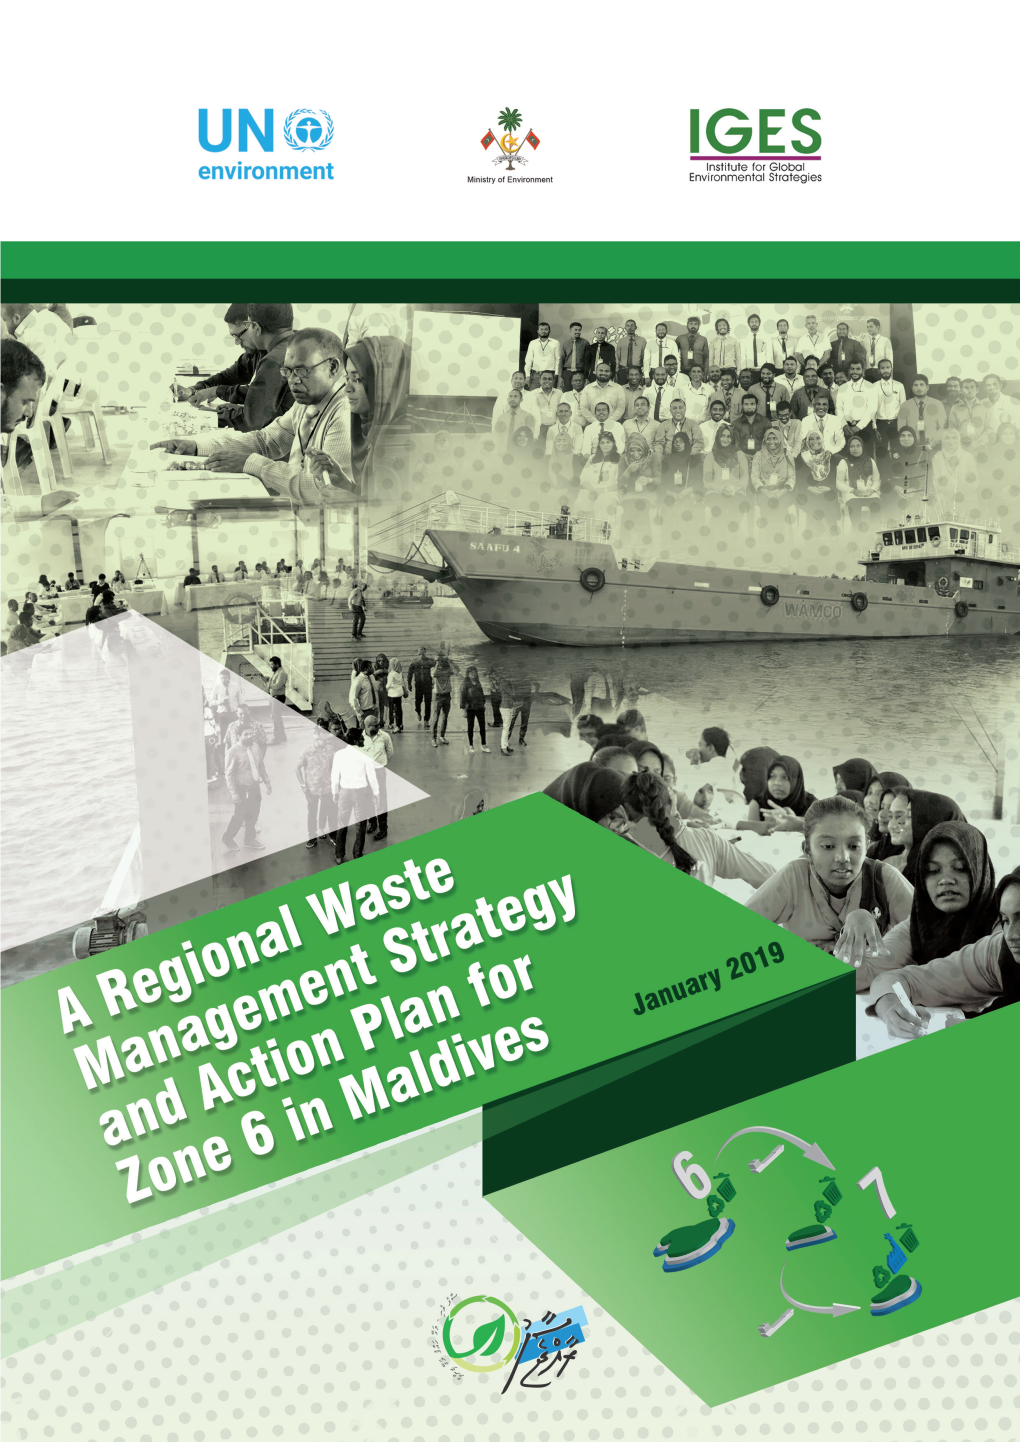 A Regional Waste Management Strategy and Action Plan for Zone 6 in Maldives